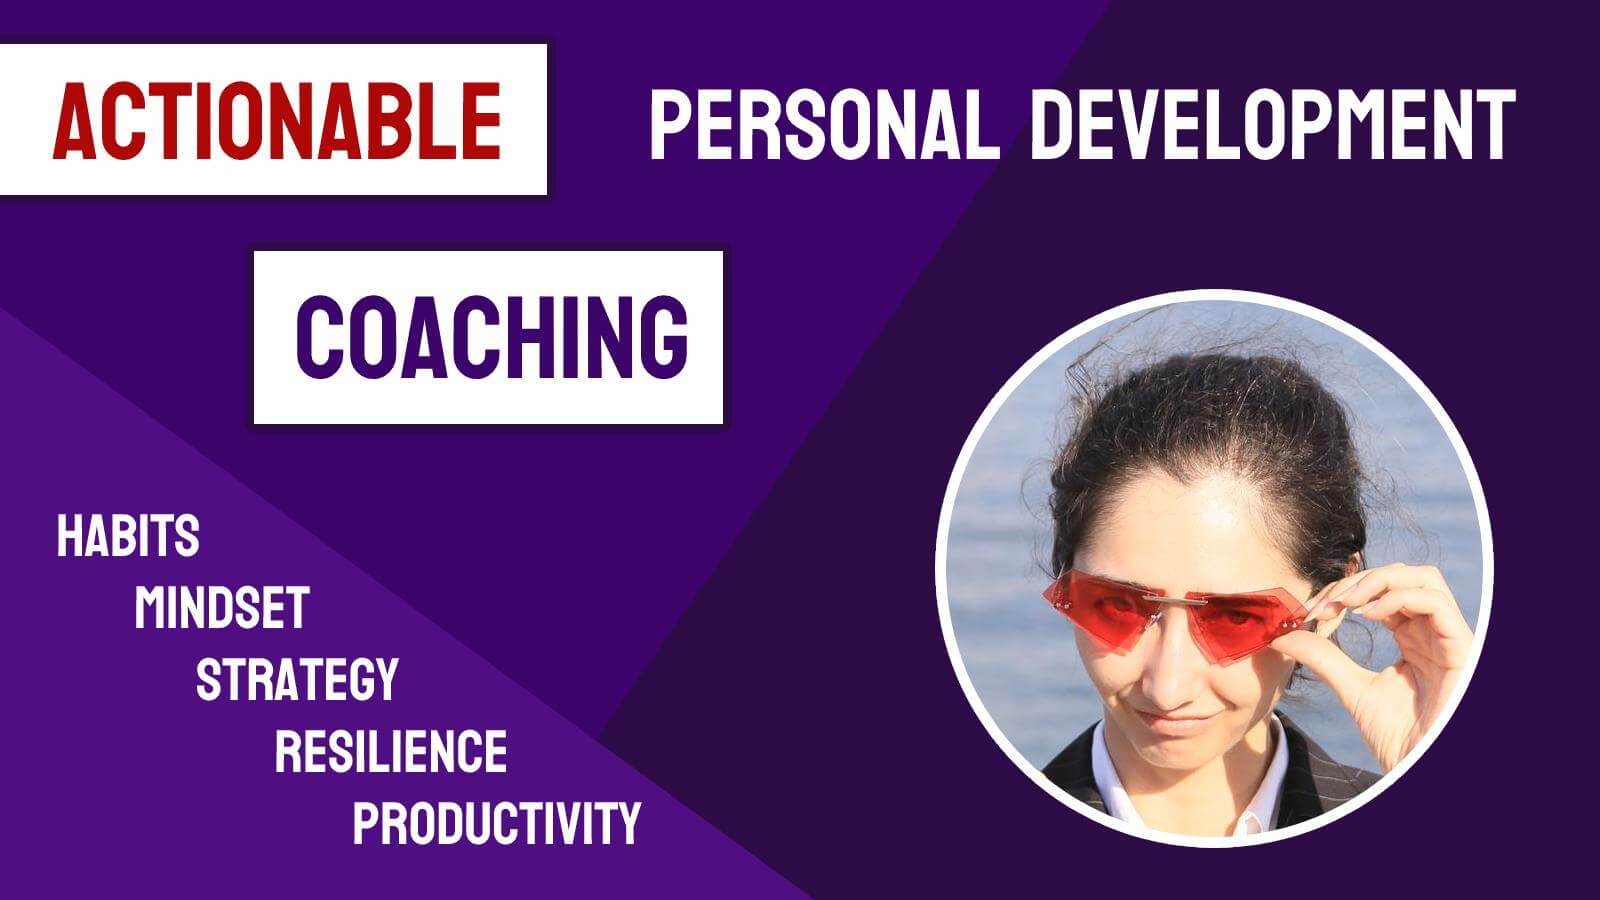 One-on-one coaching on personal and professional development